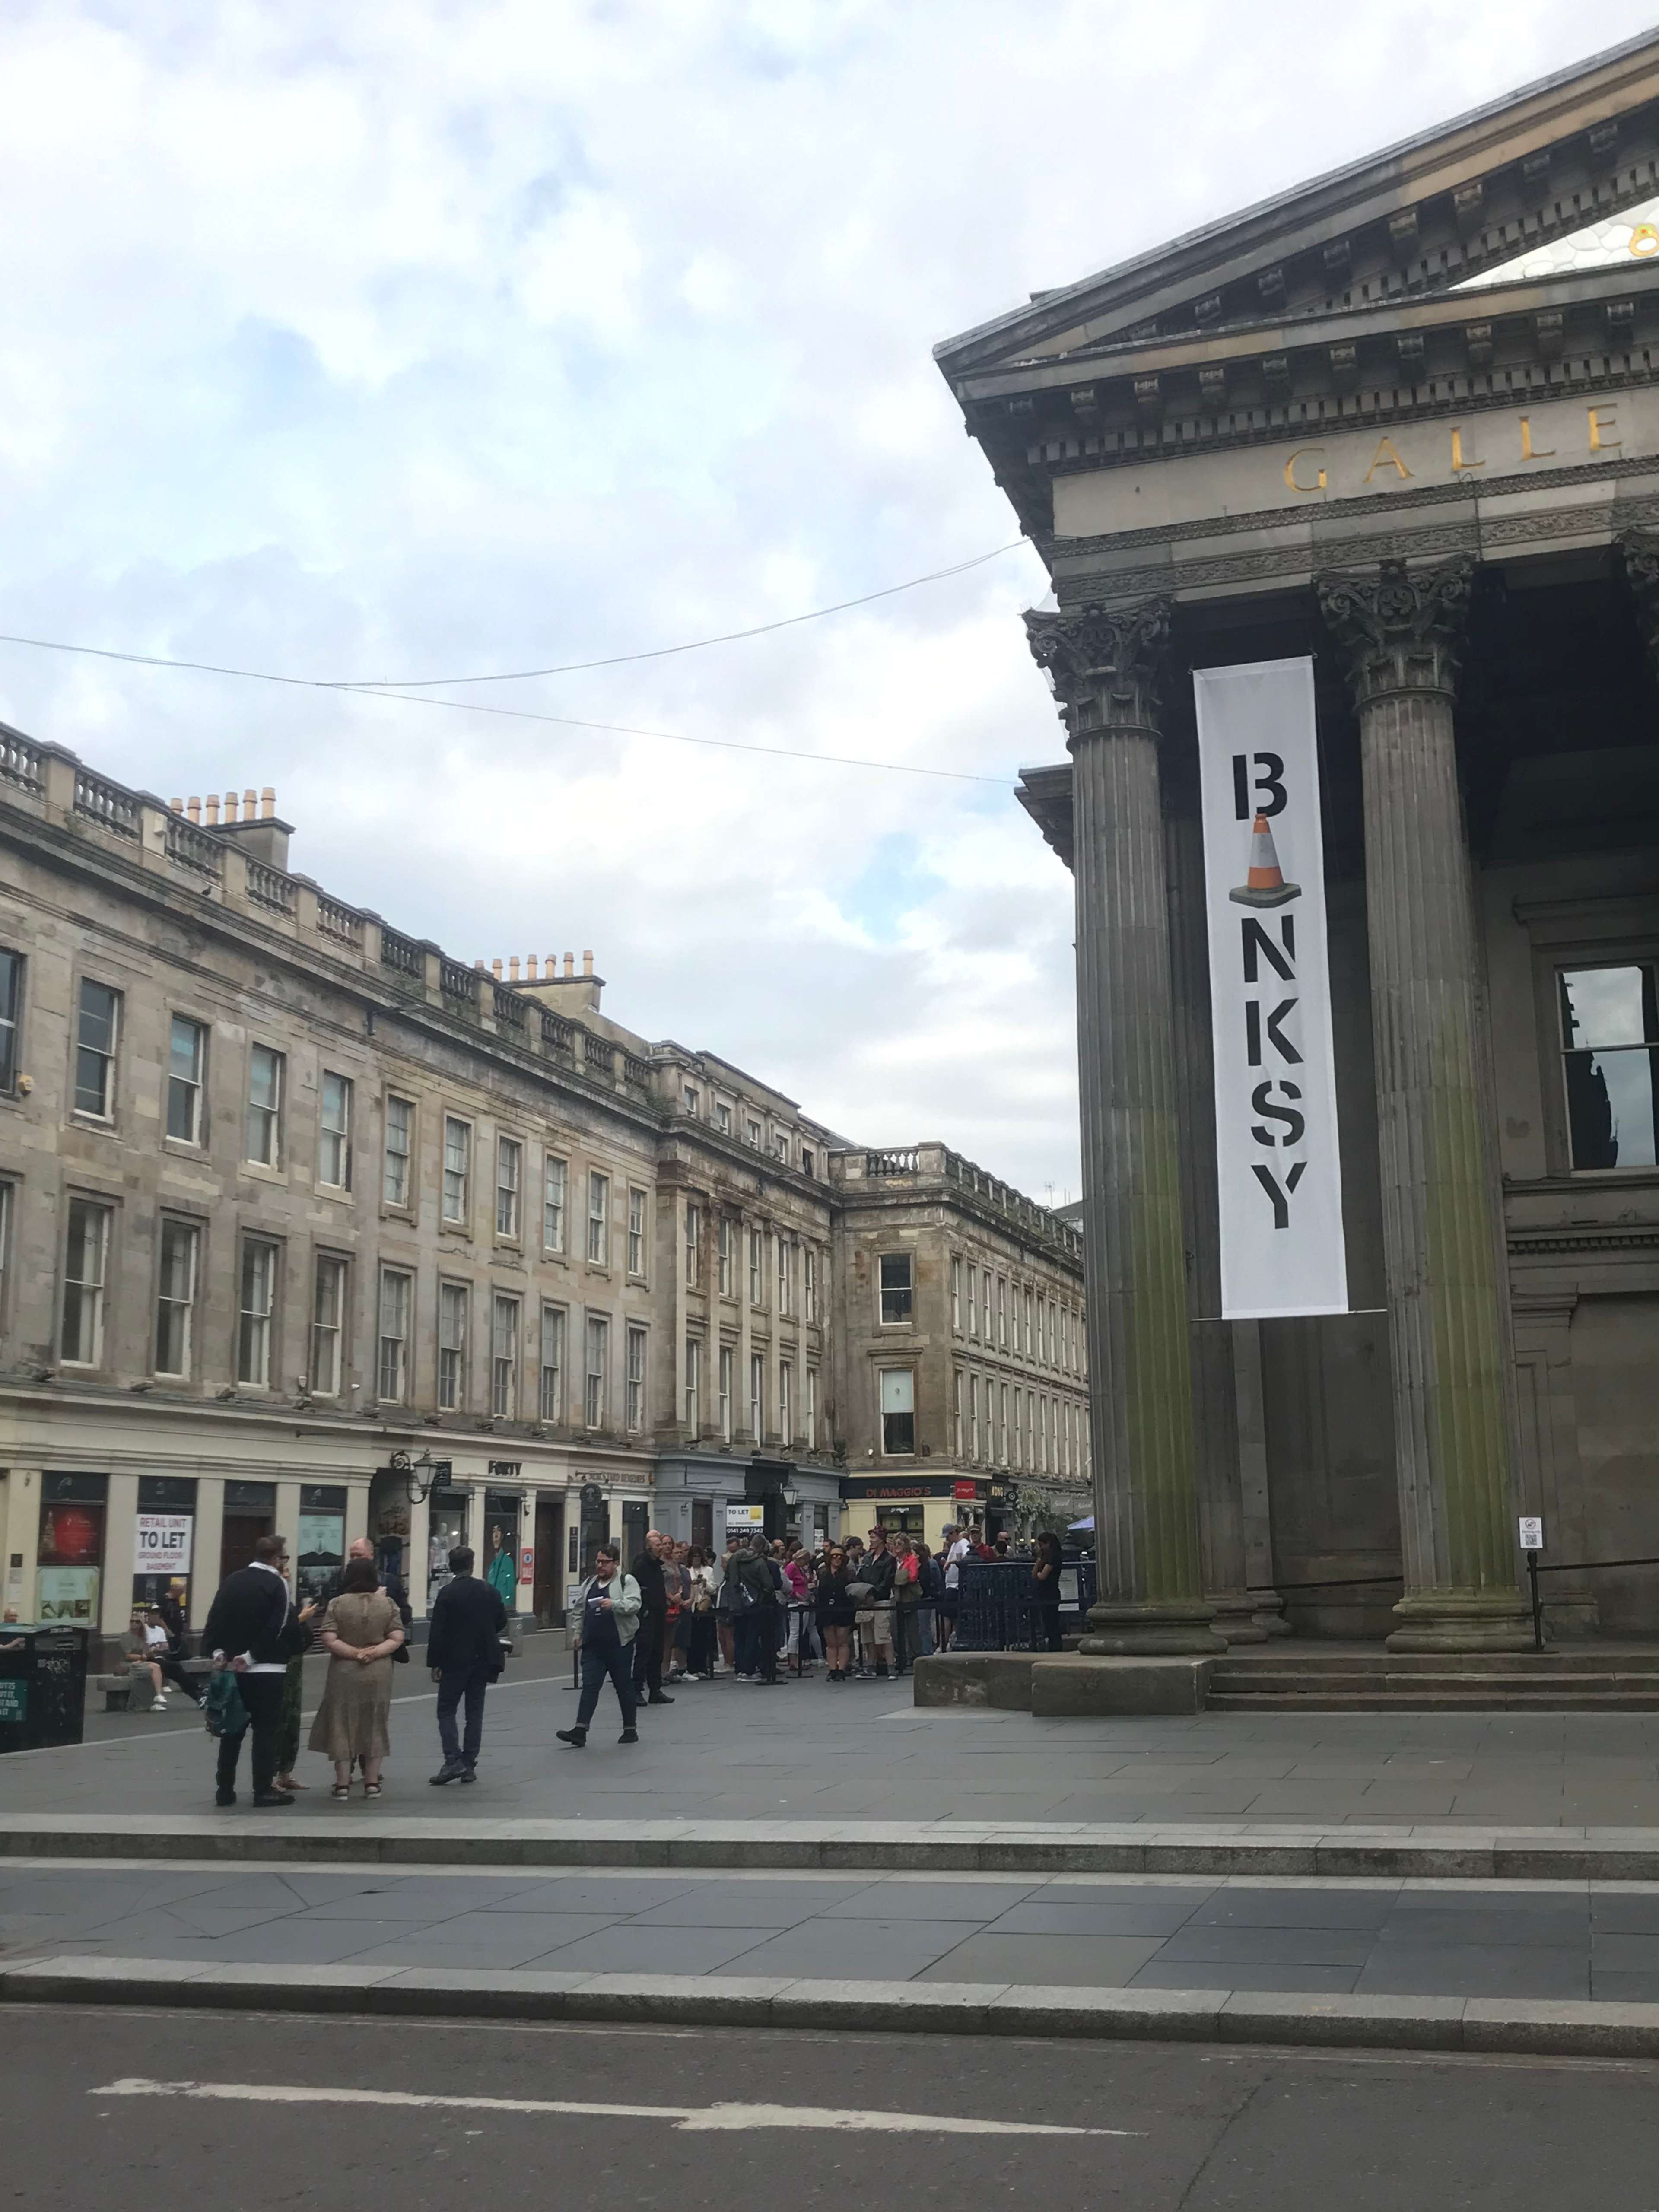 A photograph of the queue outside Banksy's CUT & RUN Exhibition at the GoMA.